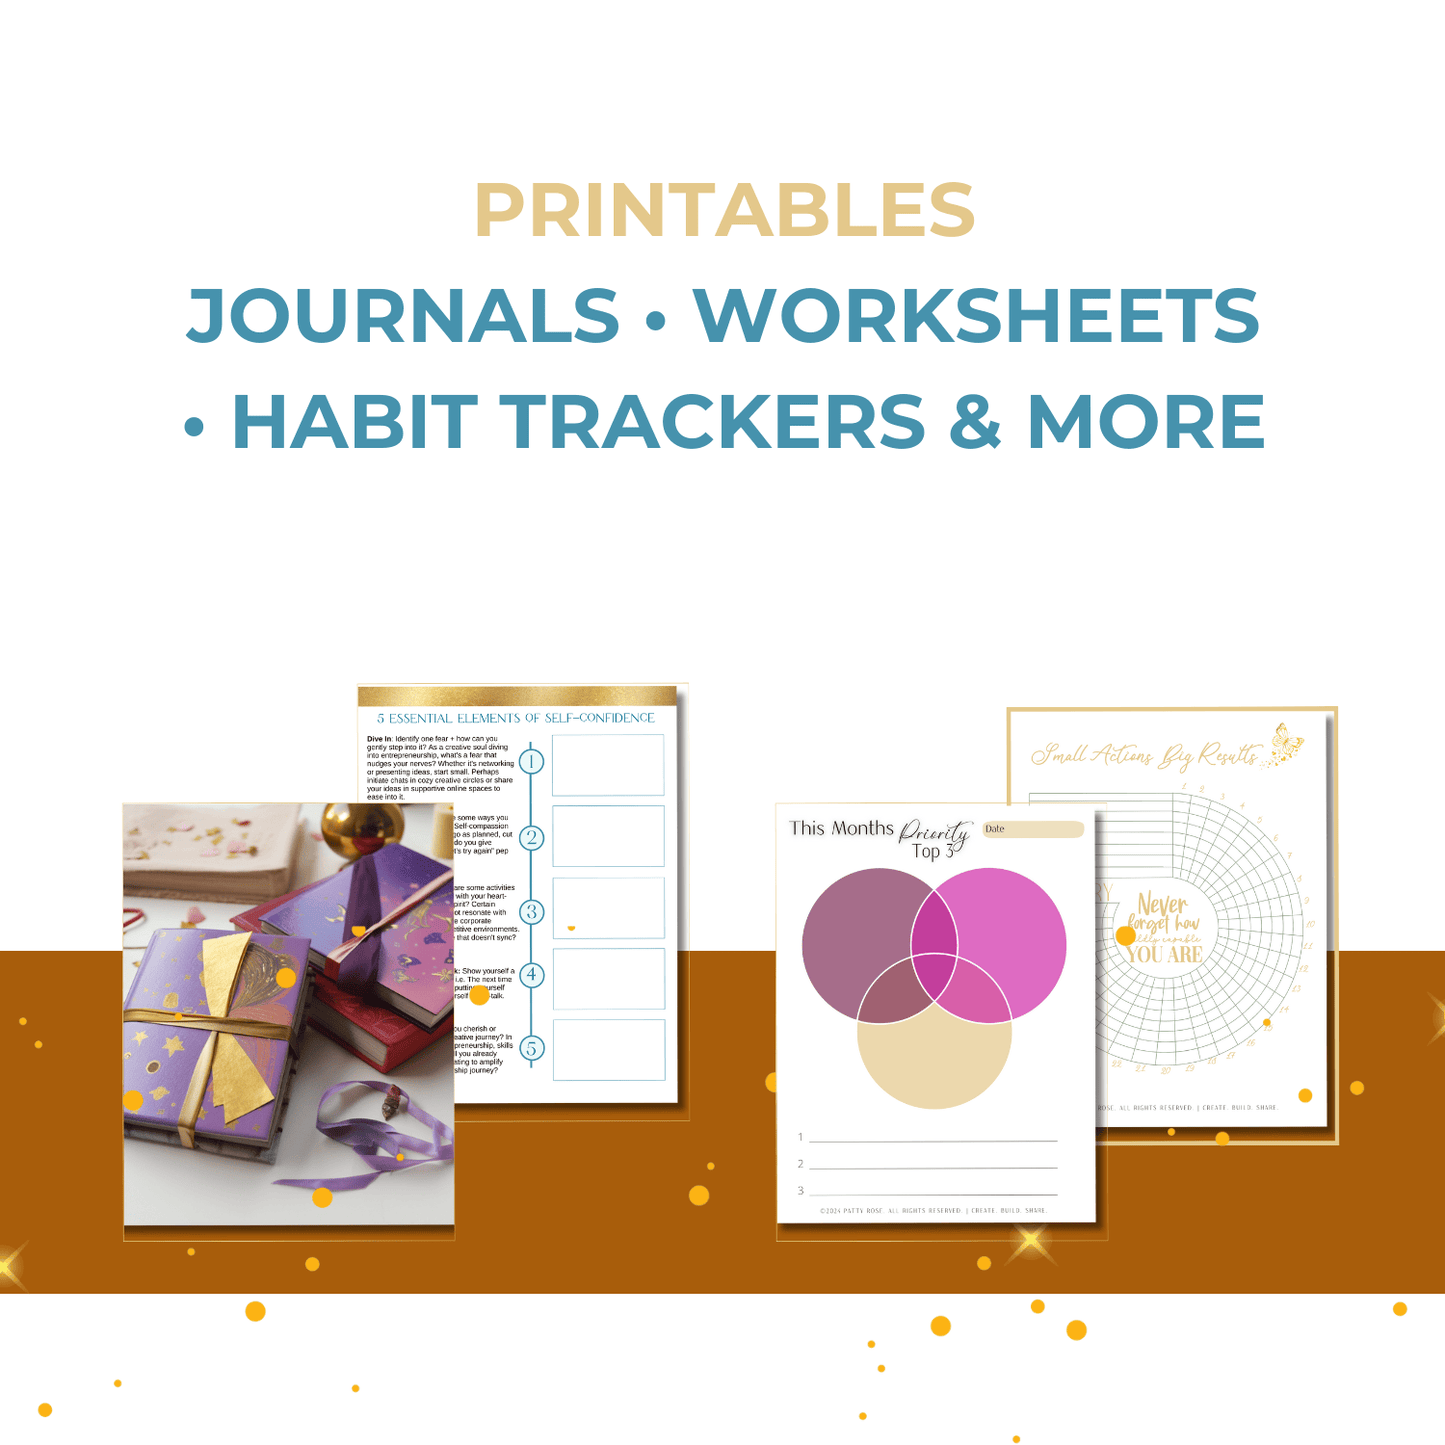 Mockup-image-of-the-PRINTABLESJournals_Worksheets_HabitTrackers_More-category-on-the-Polka-Dot-Patty-Shop